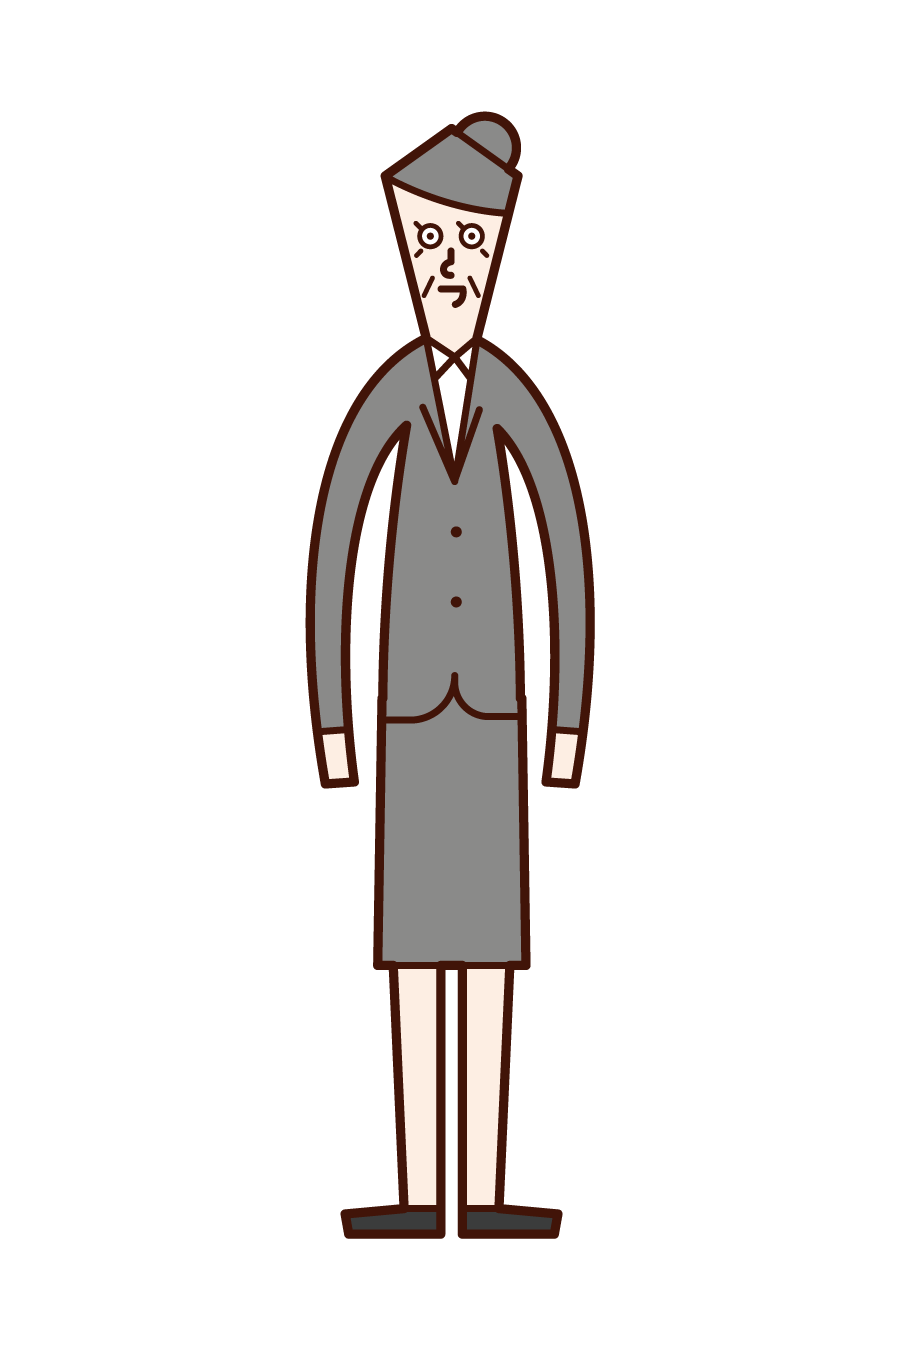 Illustration of grandmother in suit